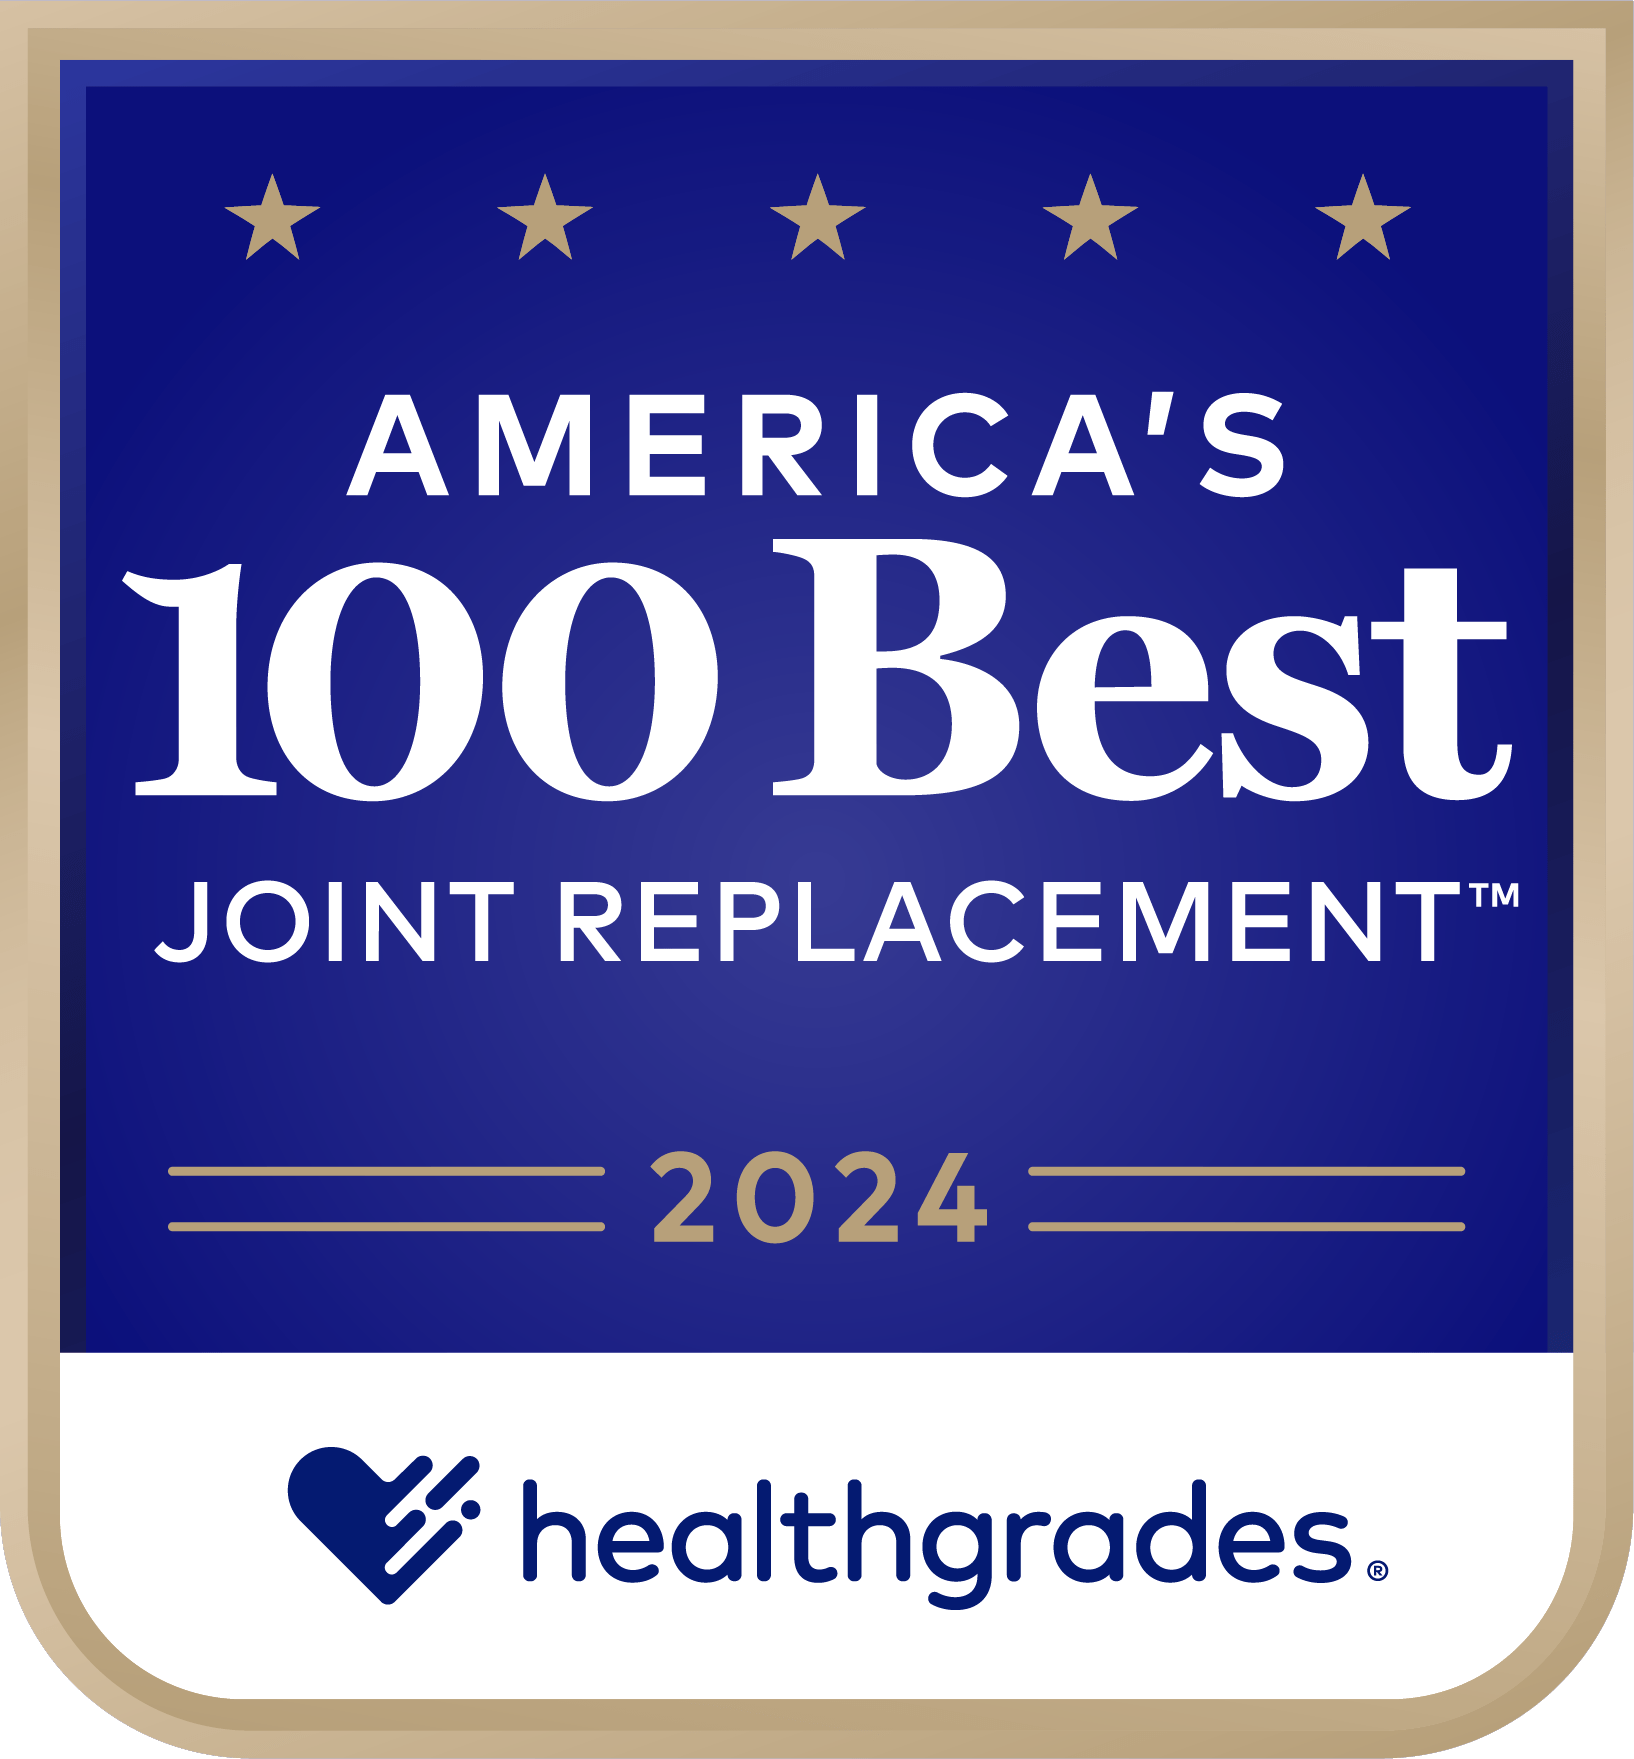 America's 100 best joint replacement healthgrades badge